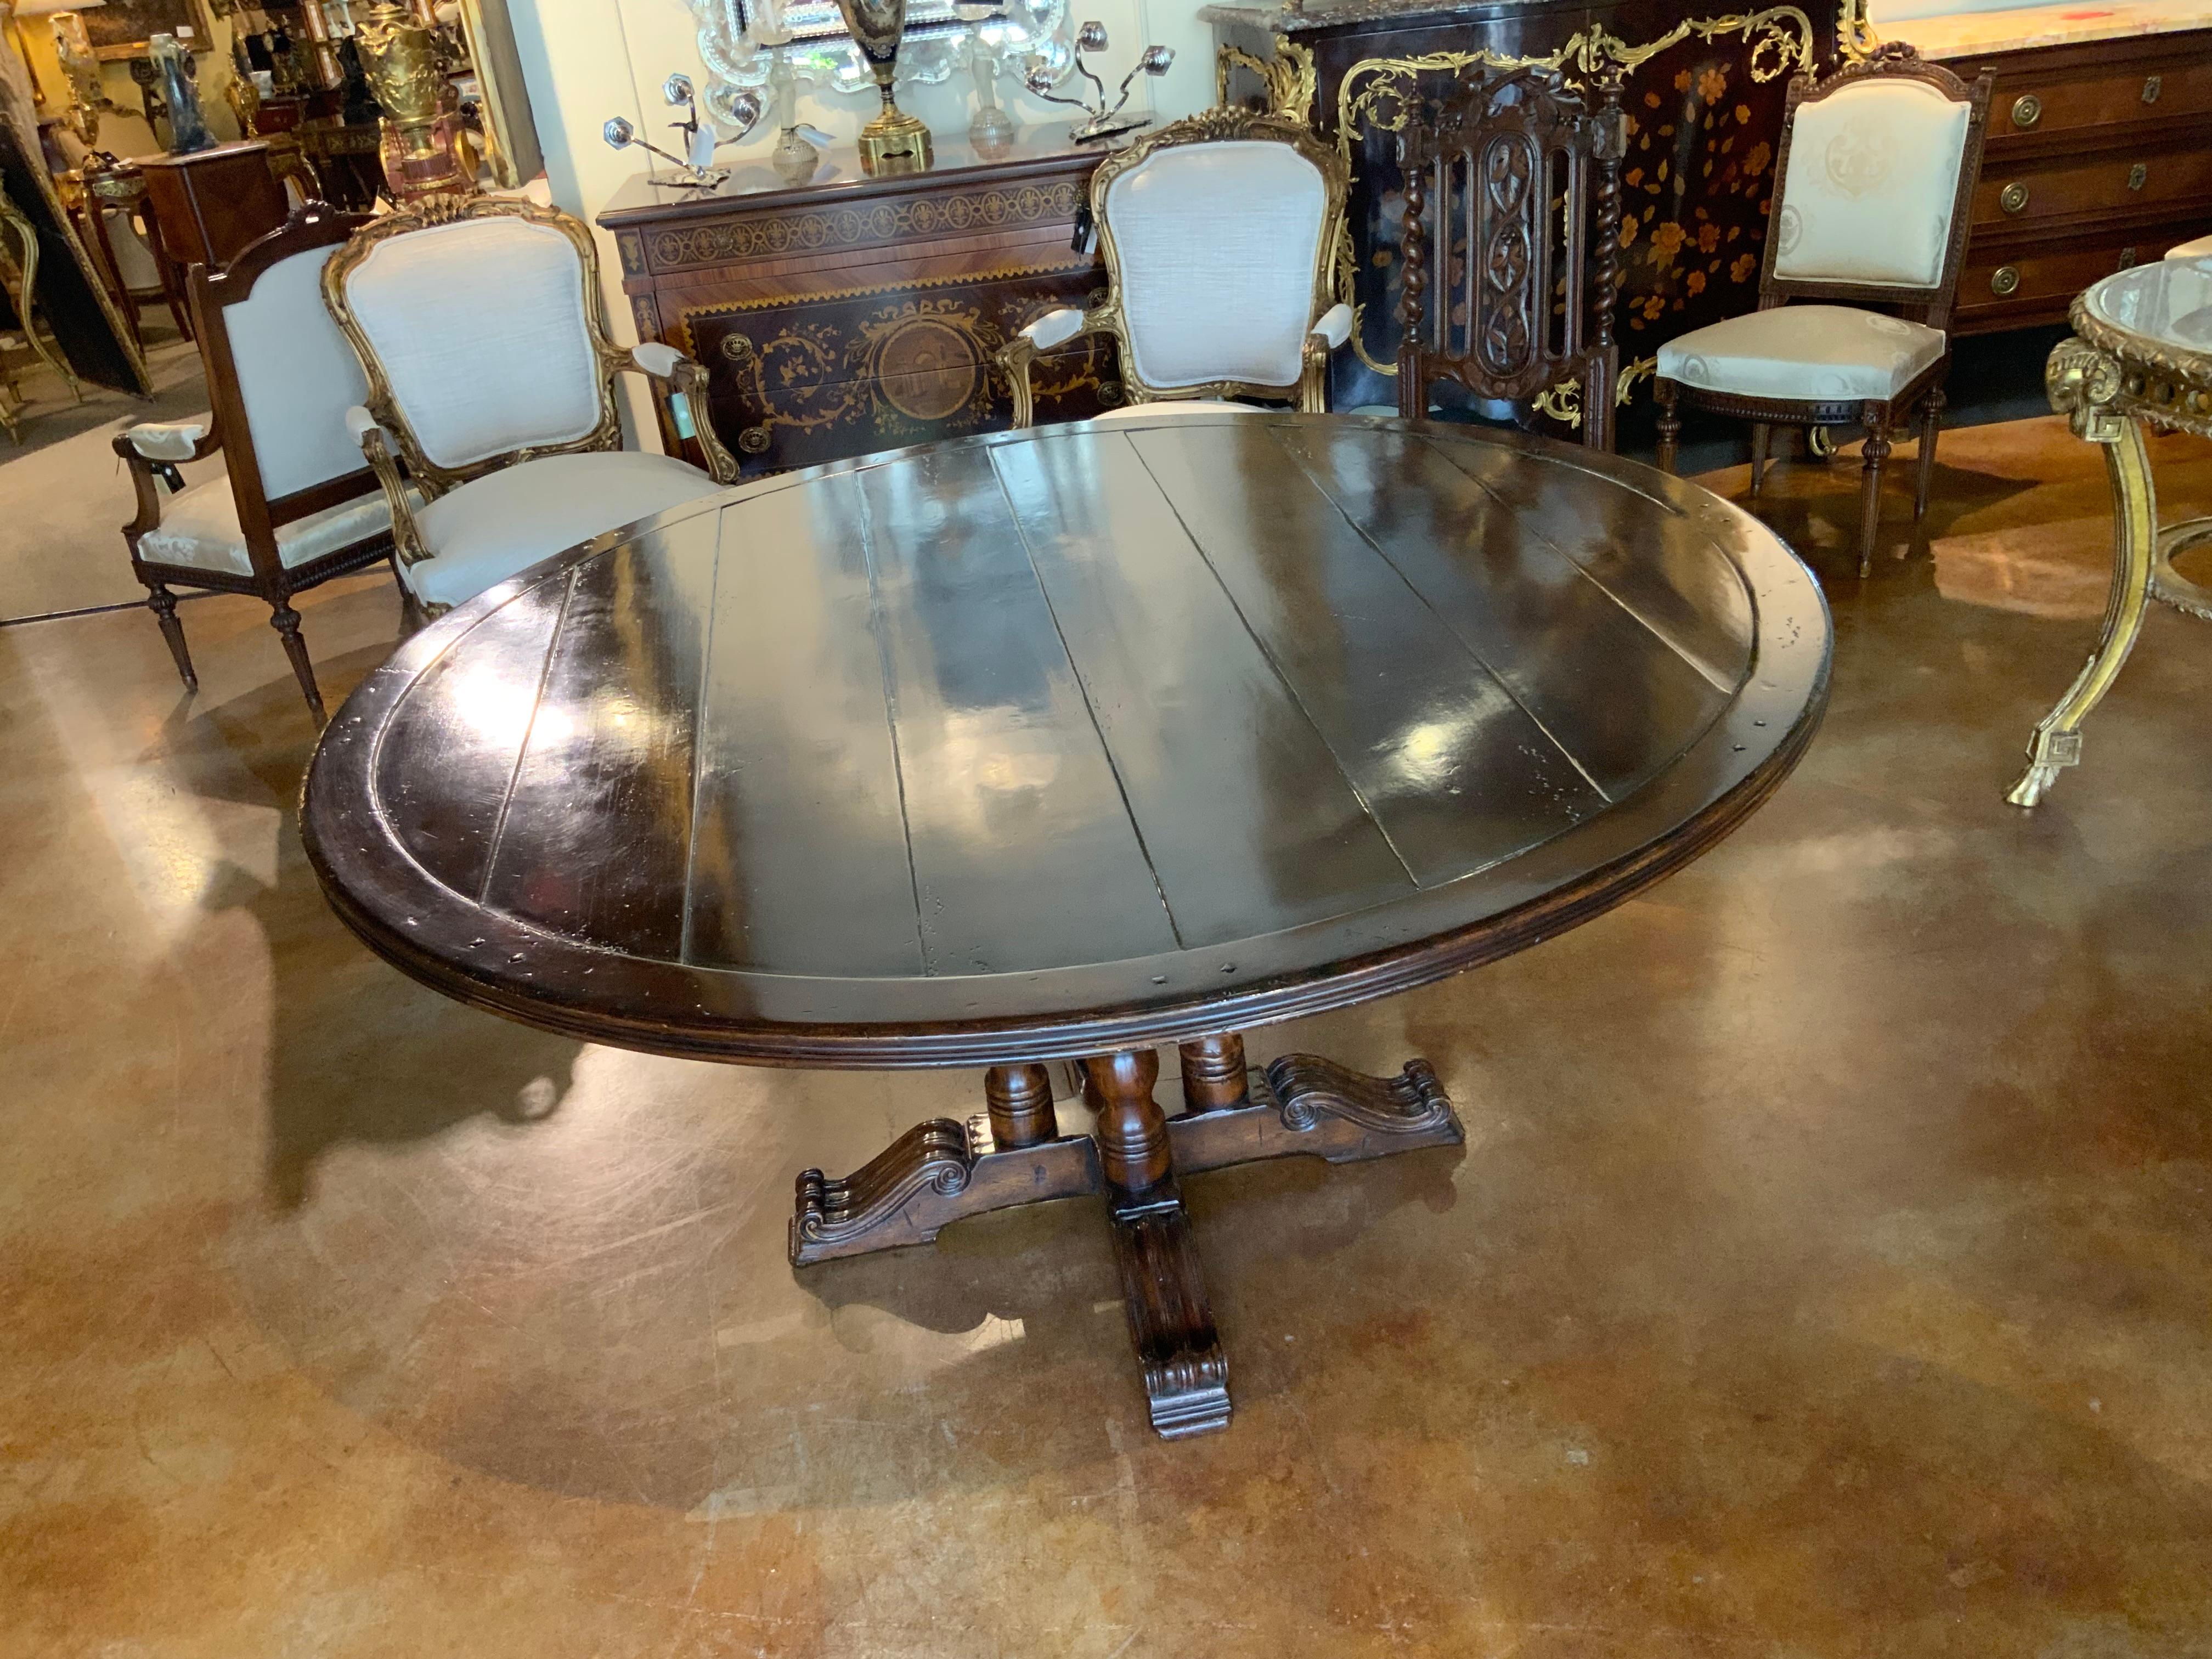 This is a handsome table with a distressed finish to look aged
With light distressing and peg marks. It has multiple planks that
Run horizontally across the table top. It has four legs that are
Centered for support and has four curved and scrolling